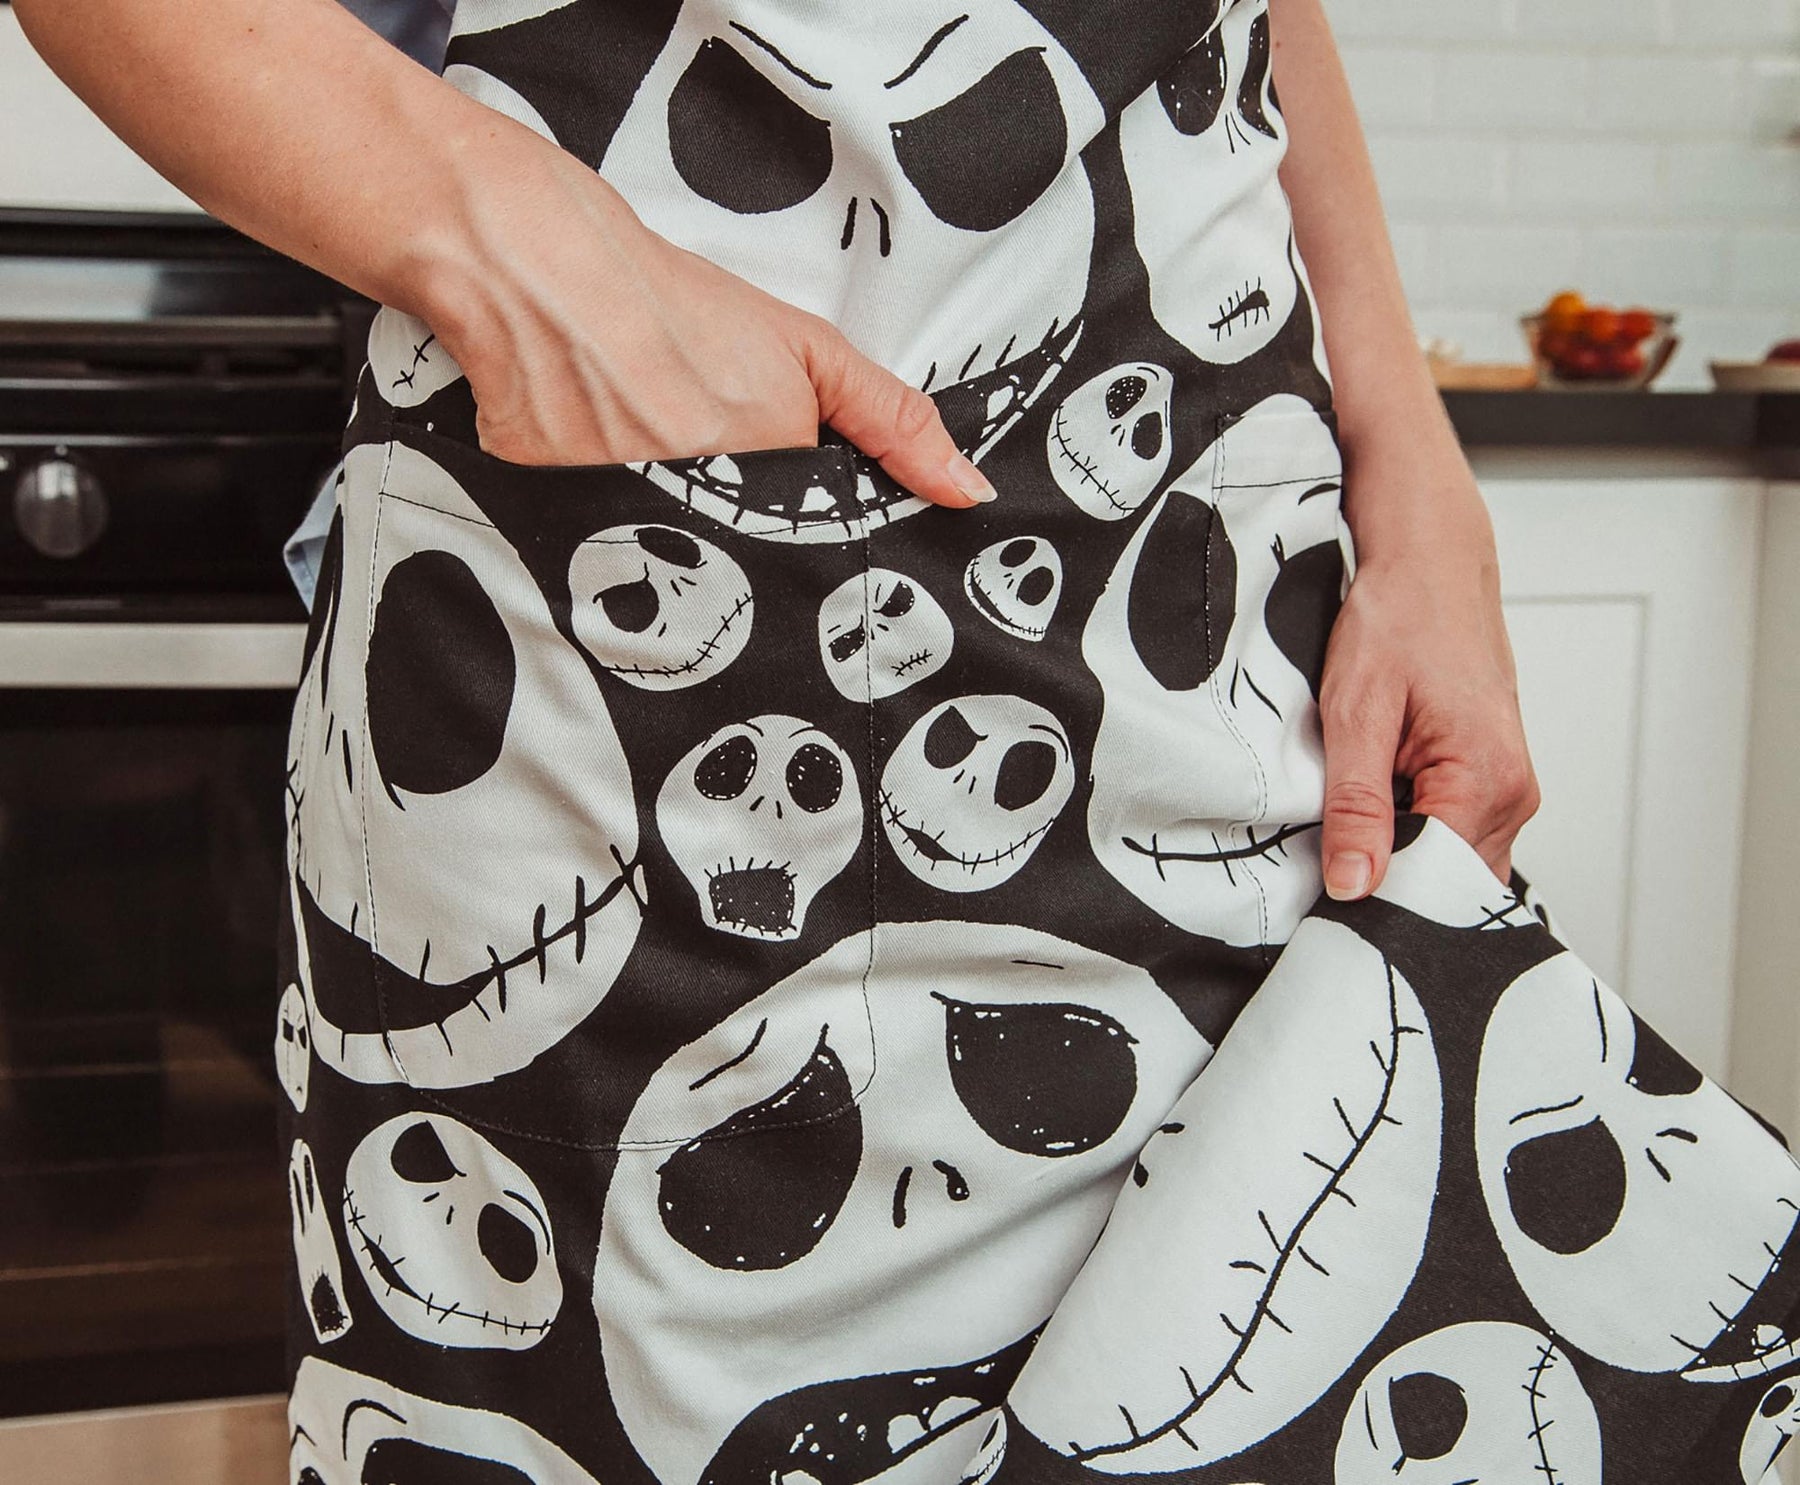 Disney The Nightmare Before Christmas Jack Skellington Faces Cooking Apron